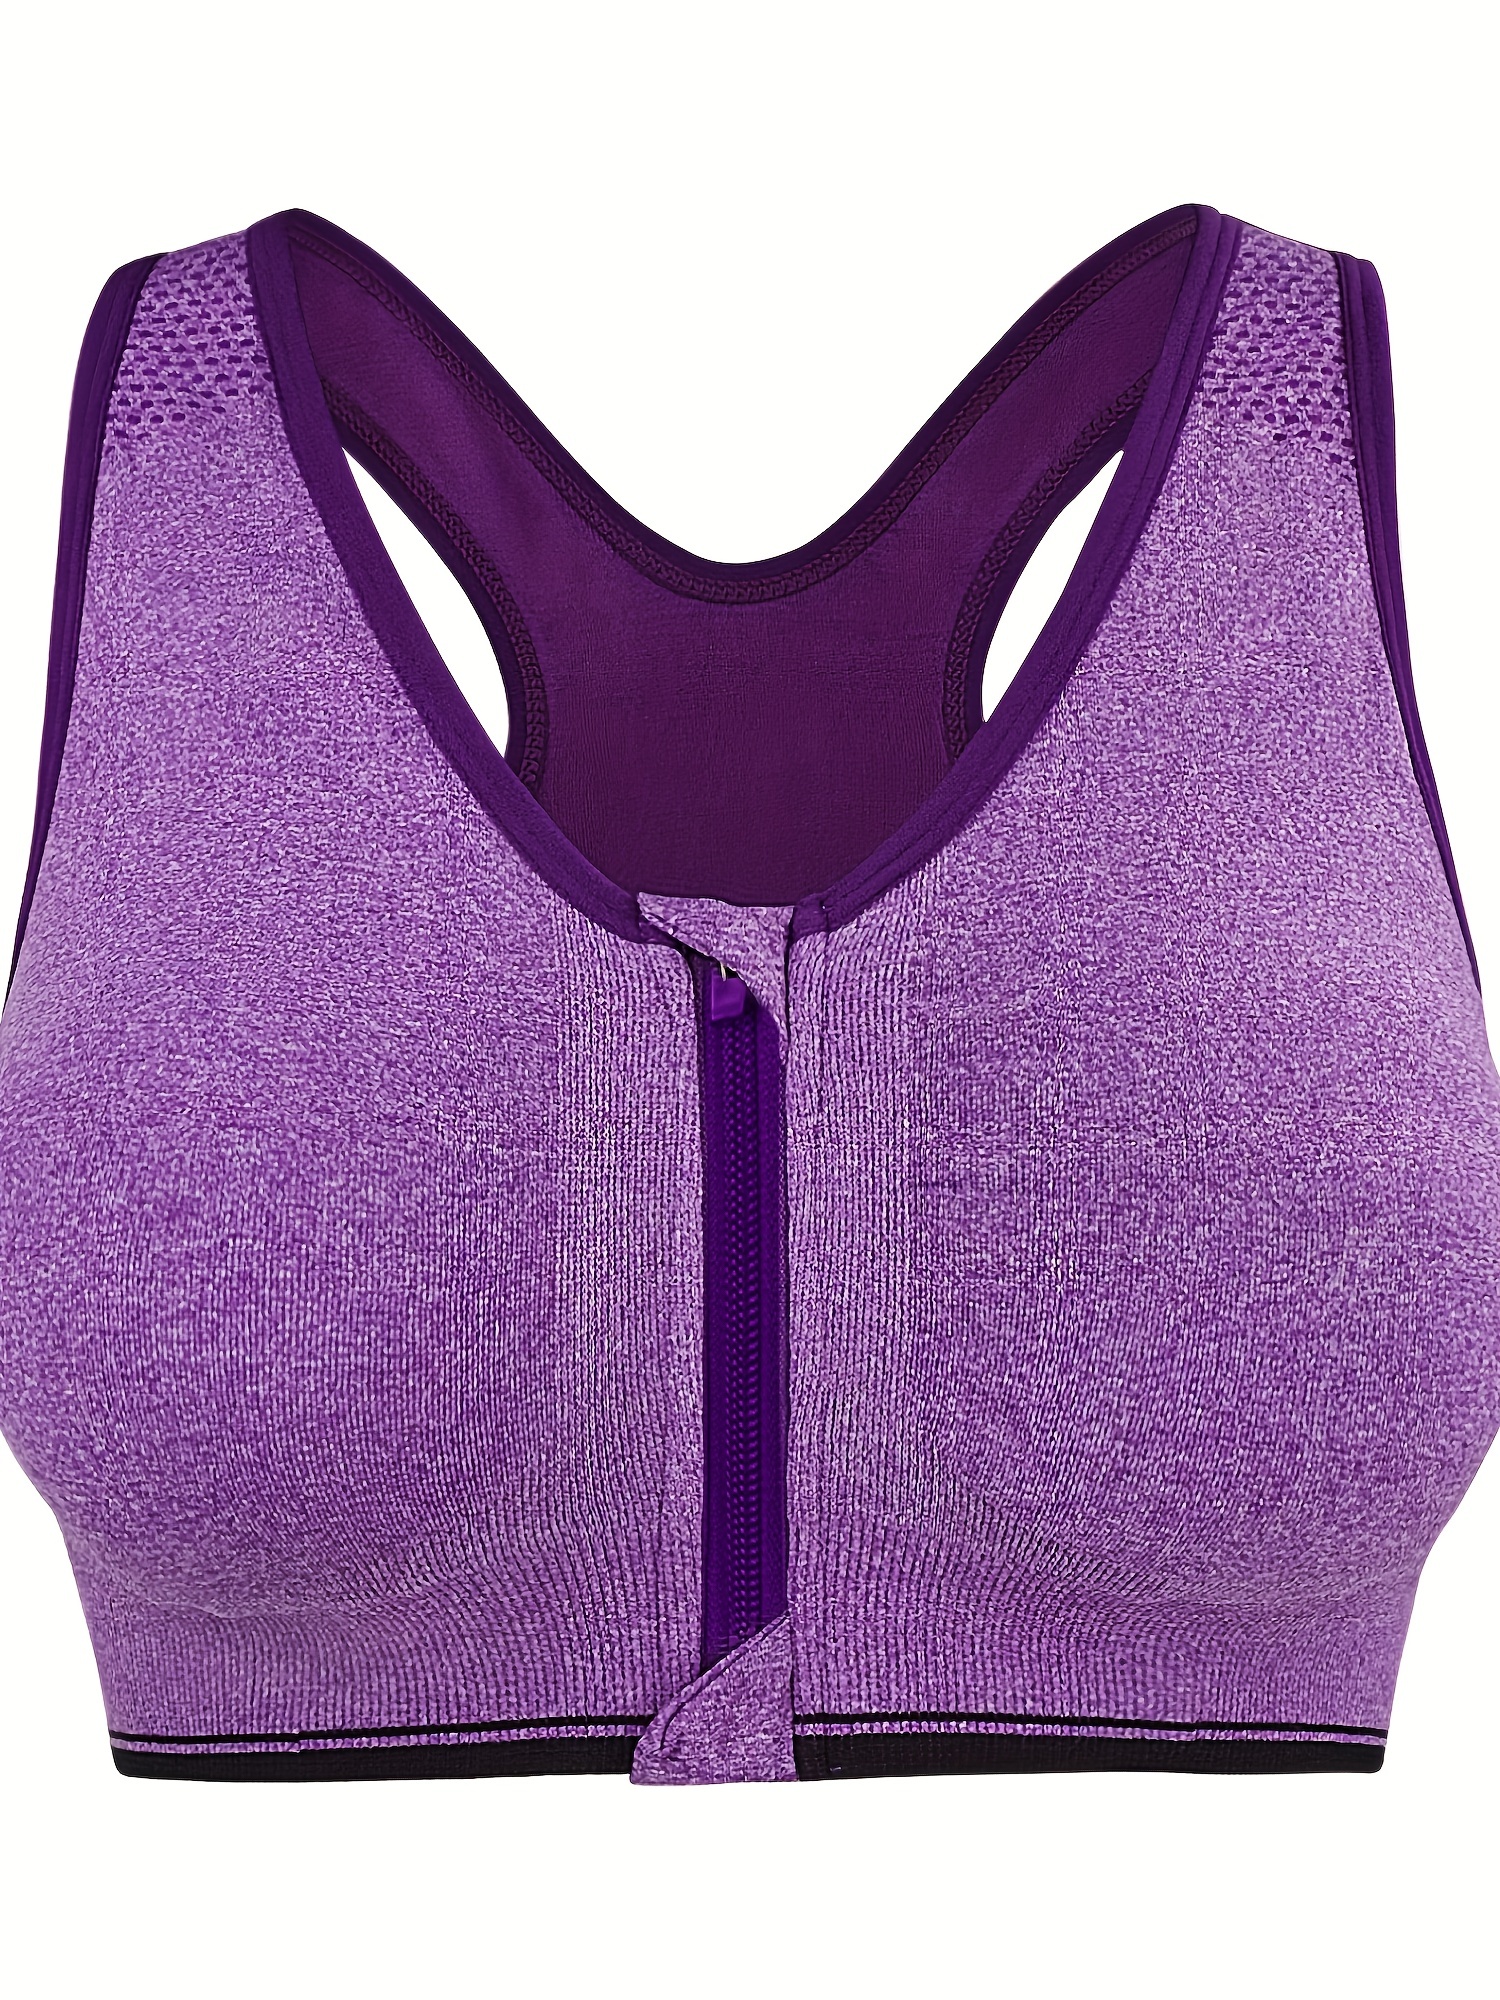  Zip Front Sports Bras for Women, No Rims Padded Yoga Crop Tank,  Racerback Support Top, Fitness Workout Running, 2 Pcs (Color : Purple, Size  : Small) : Clothing, Shoes & Jewelry